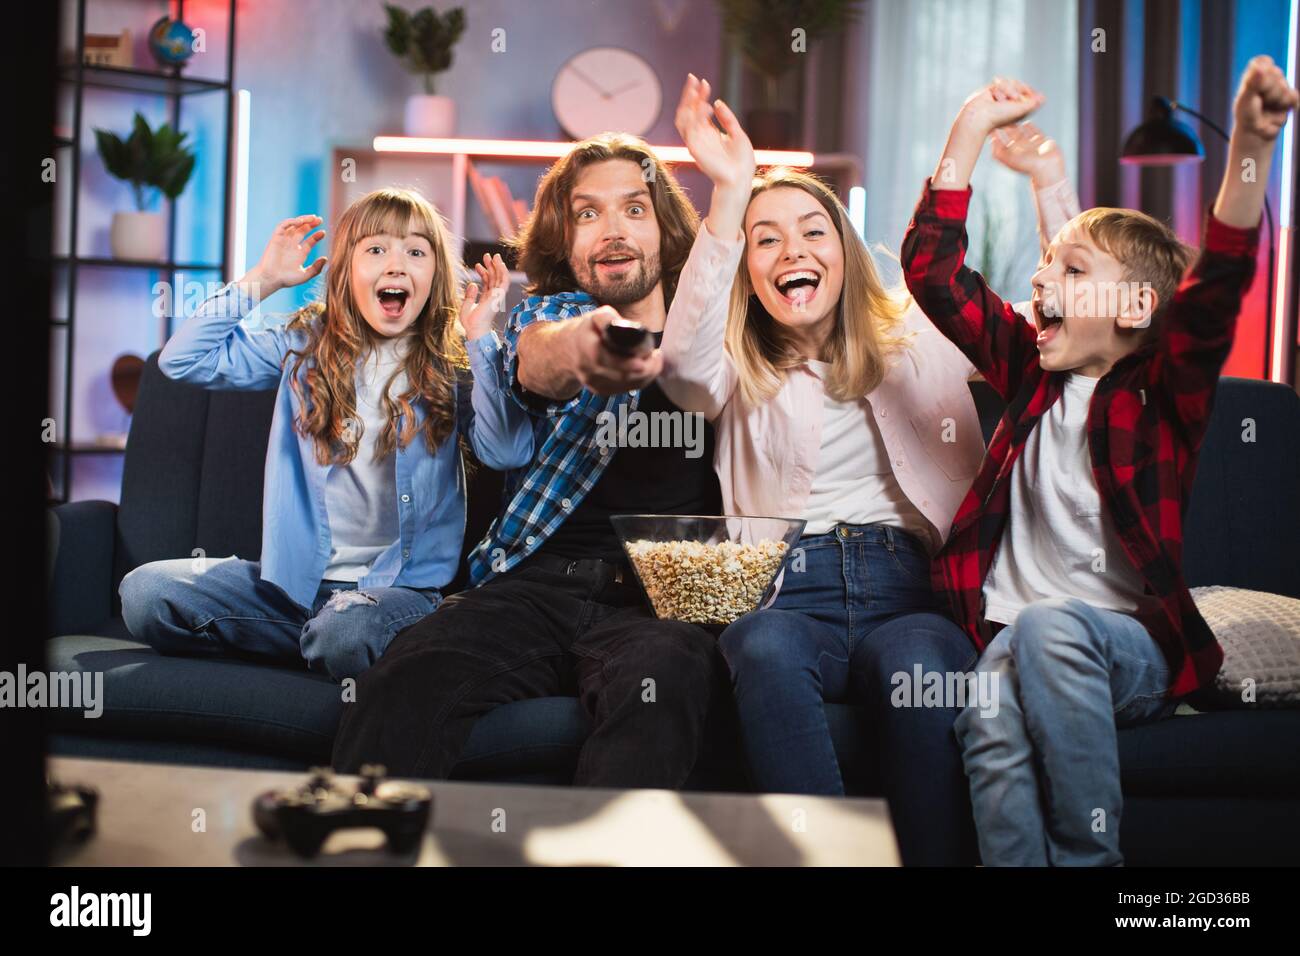 Emotional caucasian family of four dressed in casual clothes sitting on comfy couch and watching television during evening time. Human feelings and expression. Stock Photo